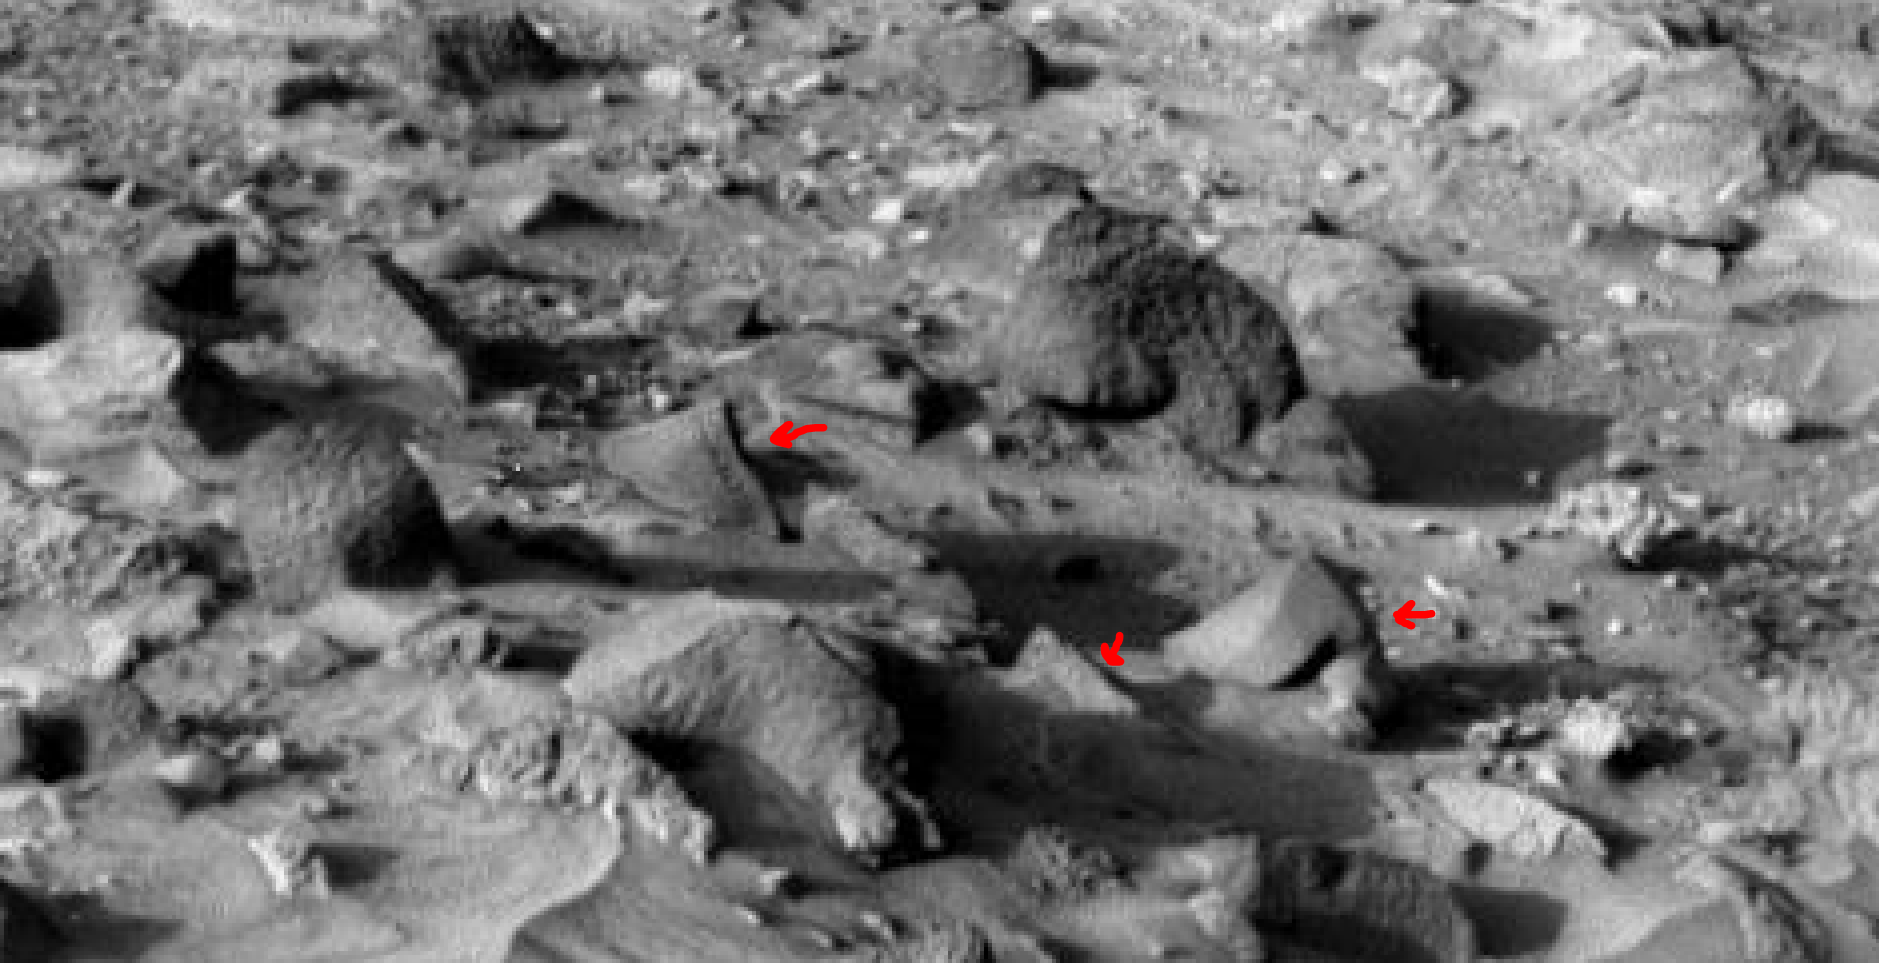 mars sol 1405 anomaly artifacts 15 was life on mars